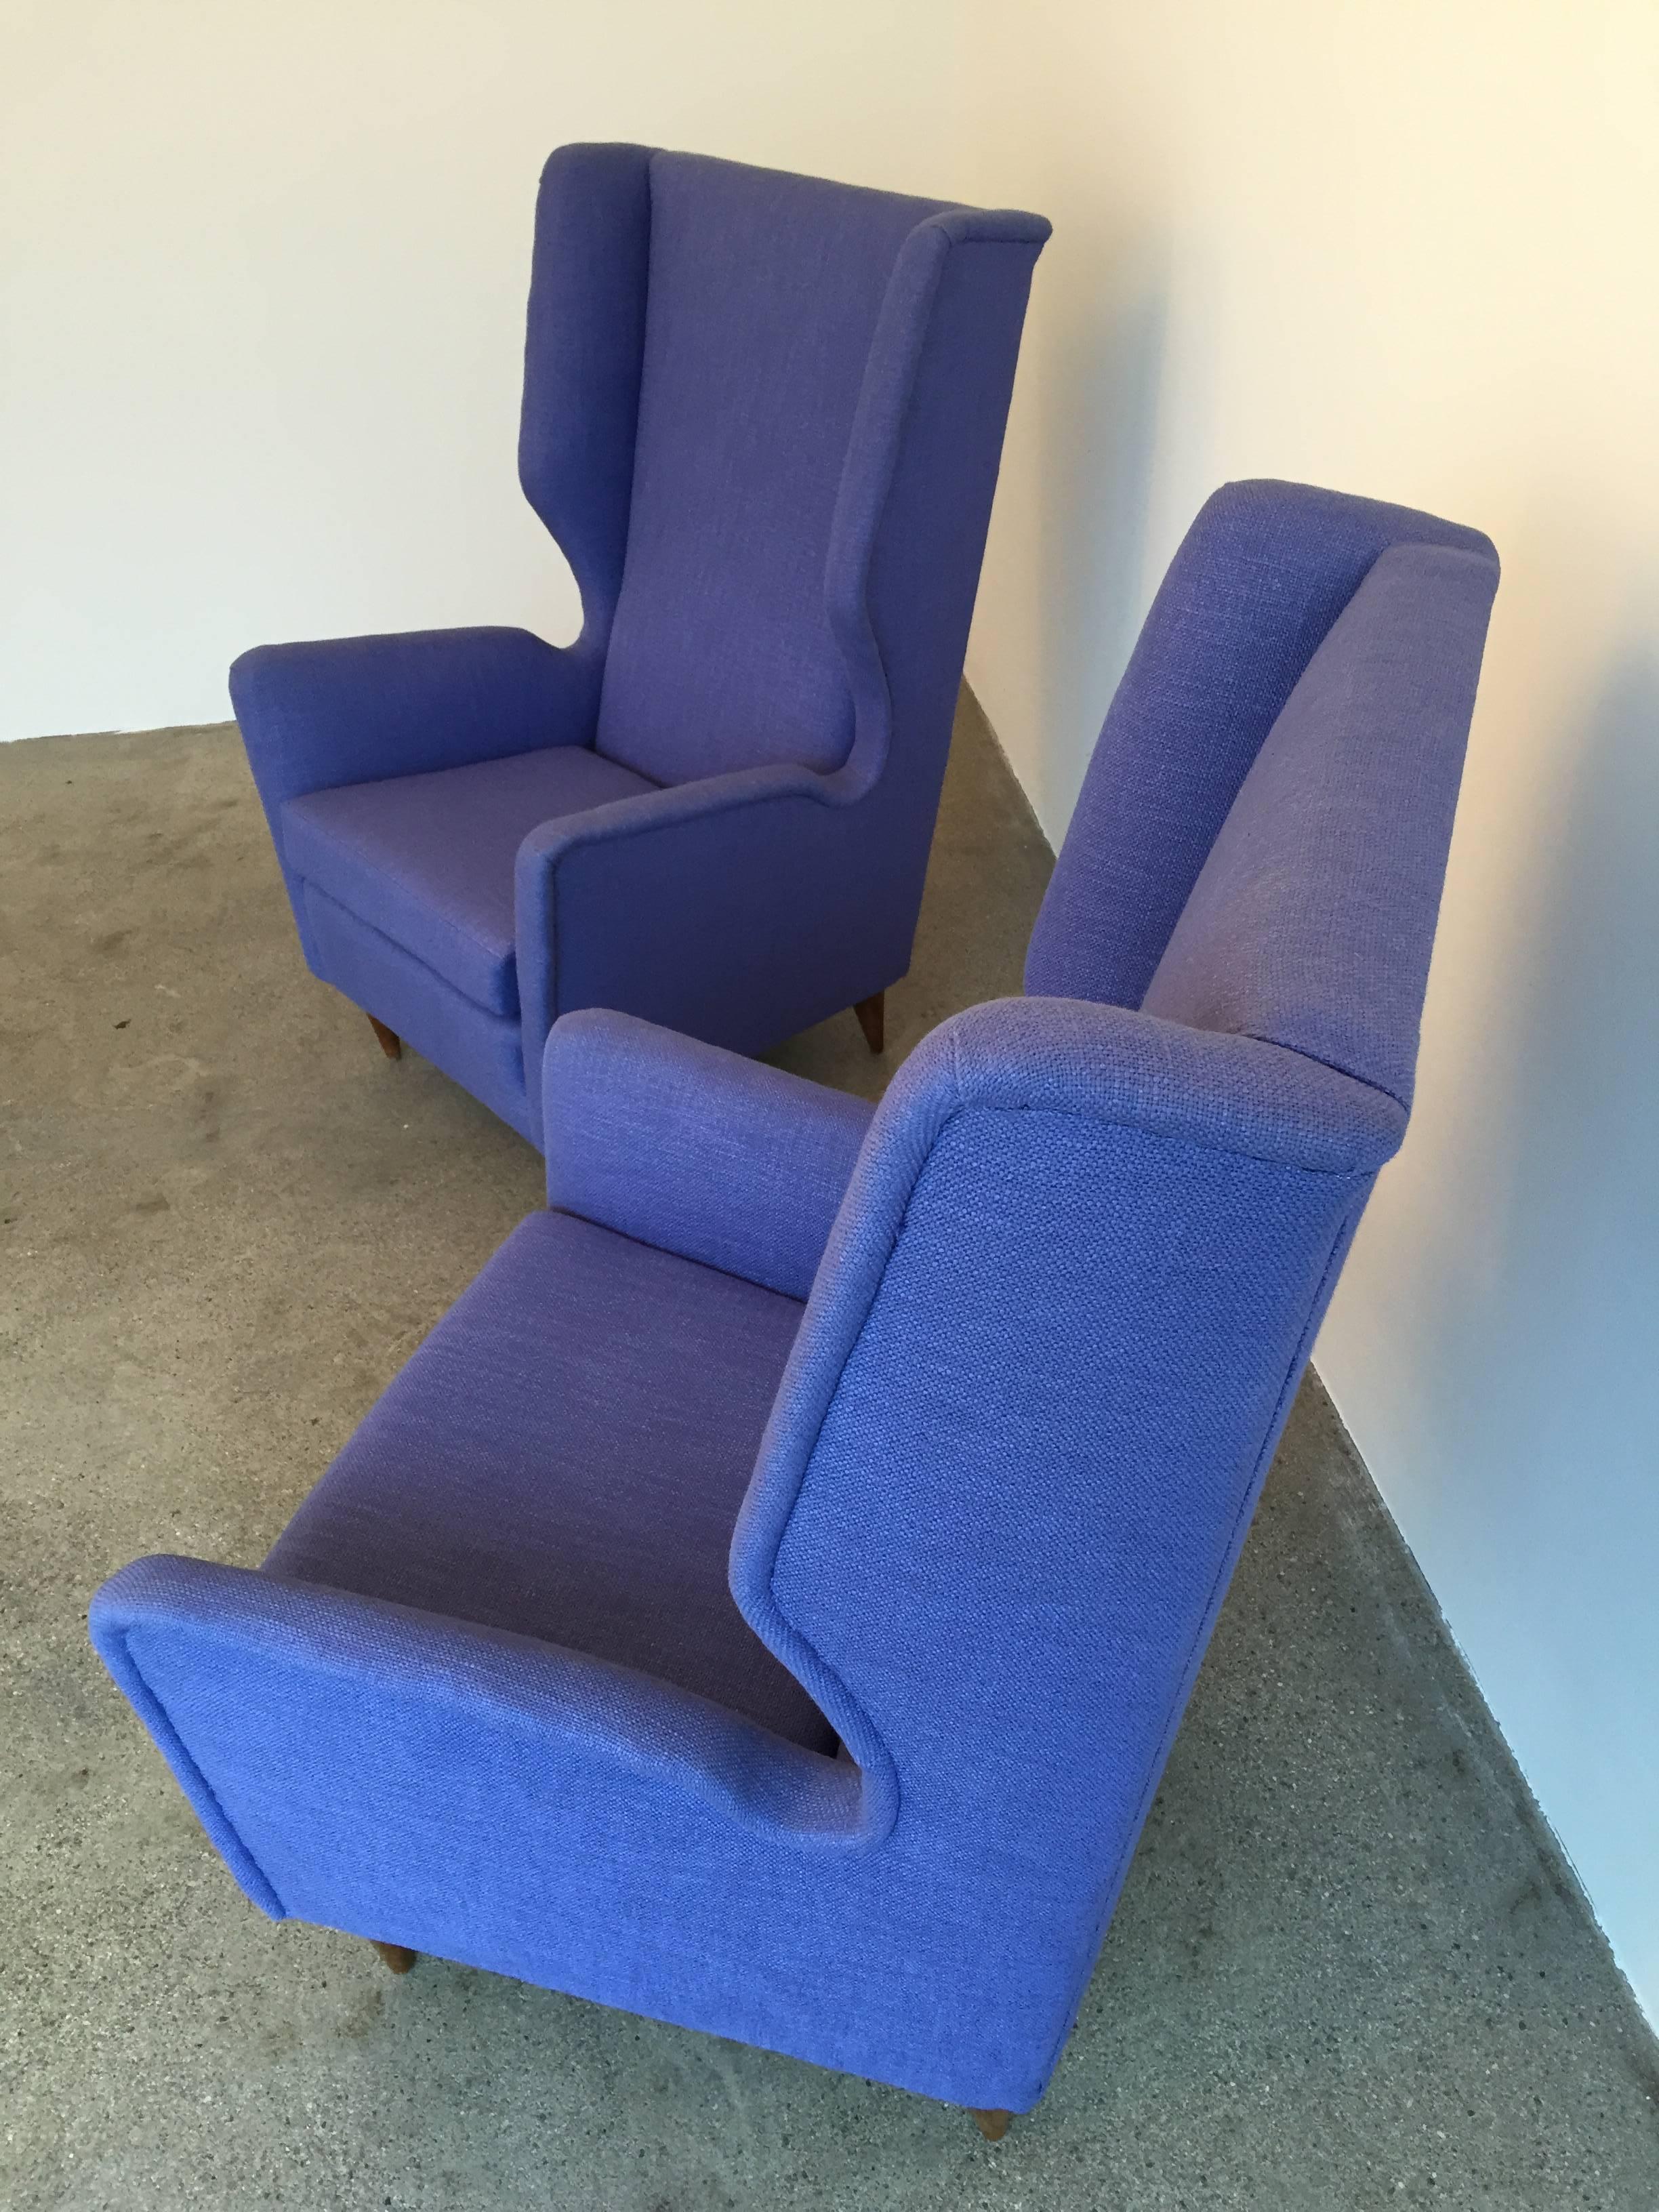 Swiss Gio Ponti Pair of Armchairs For Sale